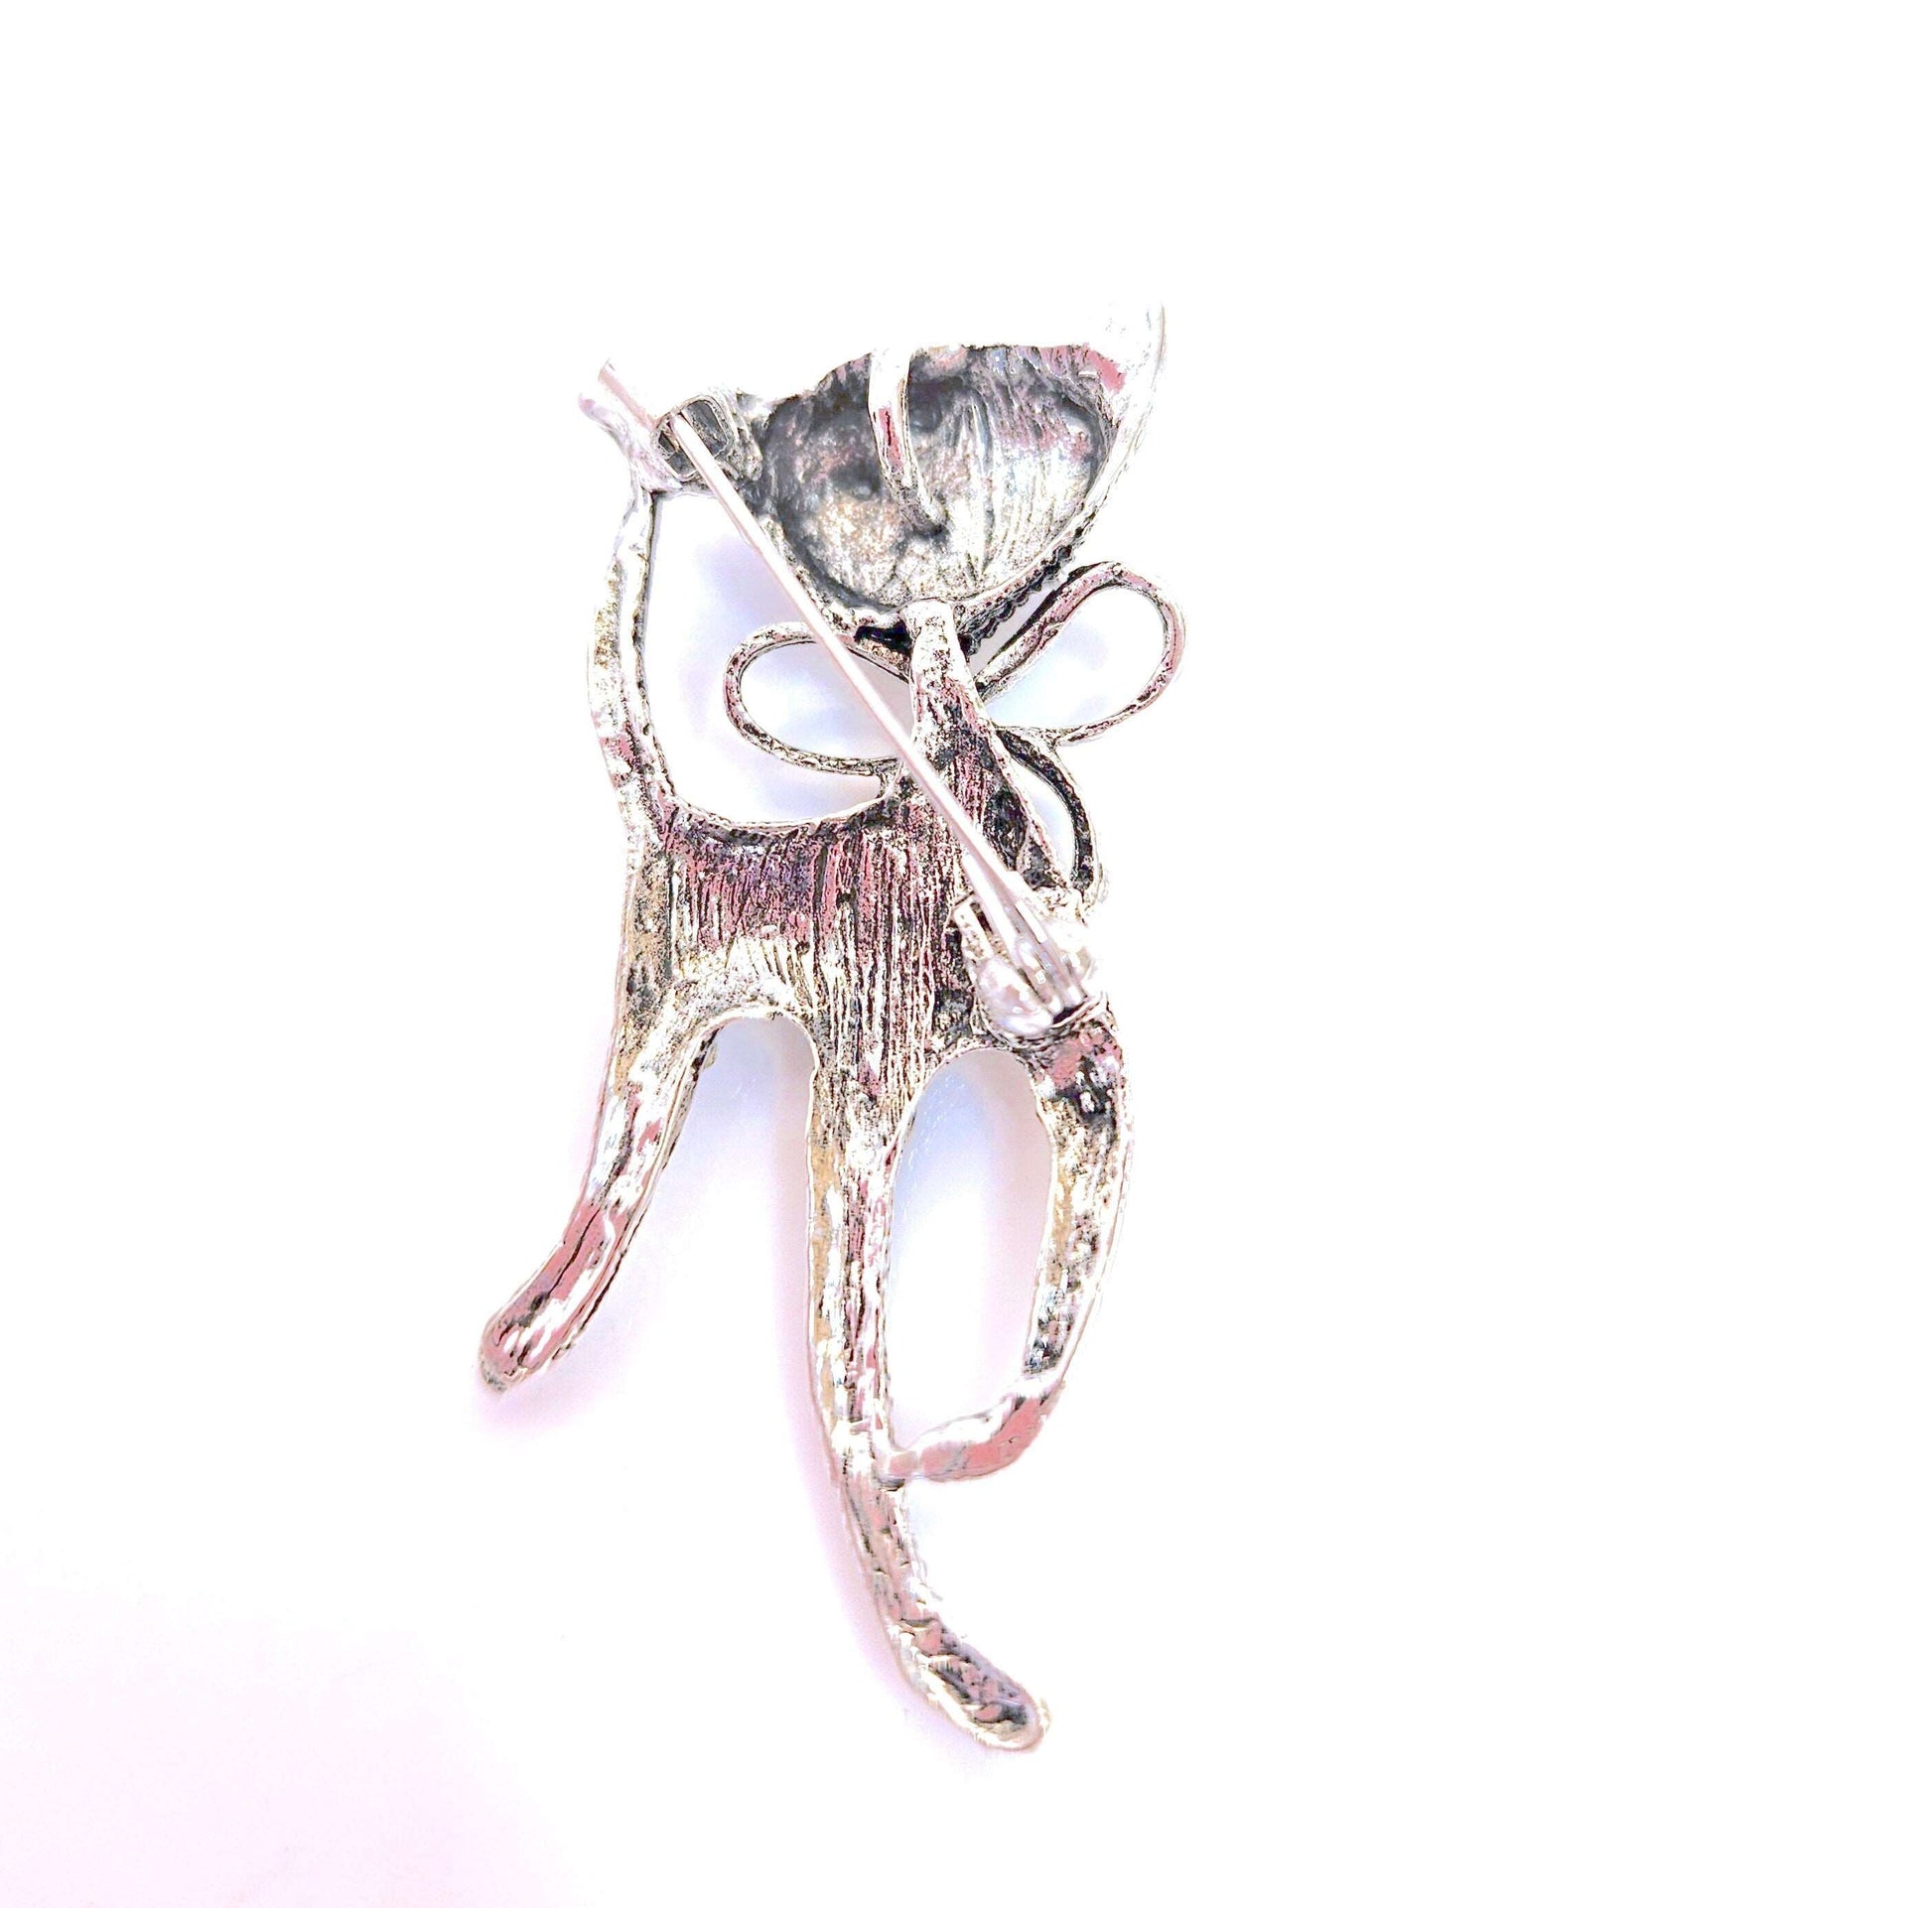 Beautiful Vintage Cat Brooch, Gift for Cat Lovers, Rhinestone Cat, Silver Crystal Cat Pin, Brooches For Women